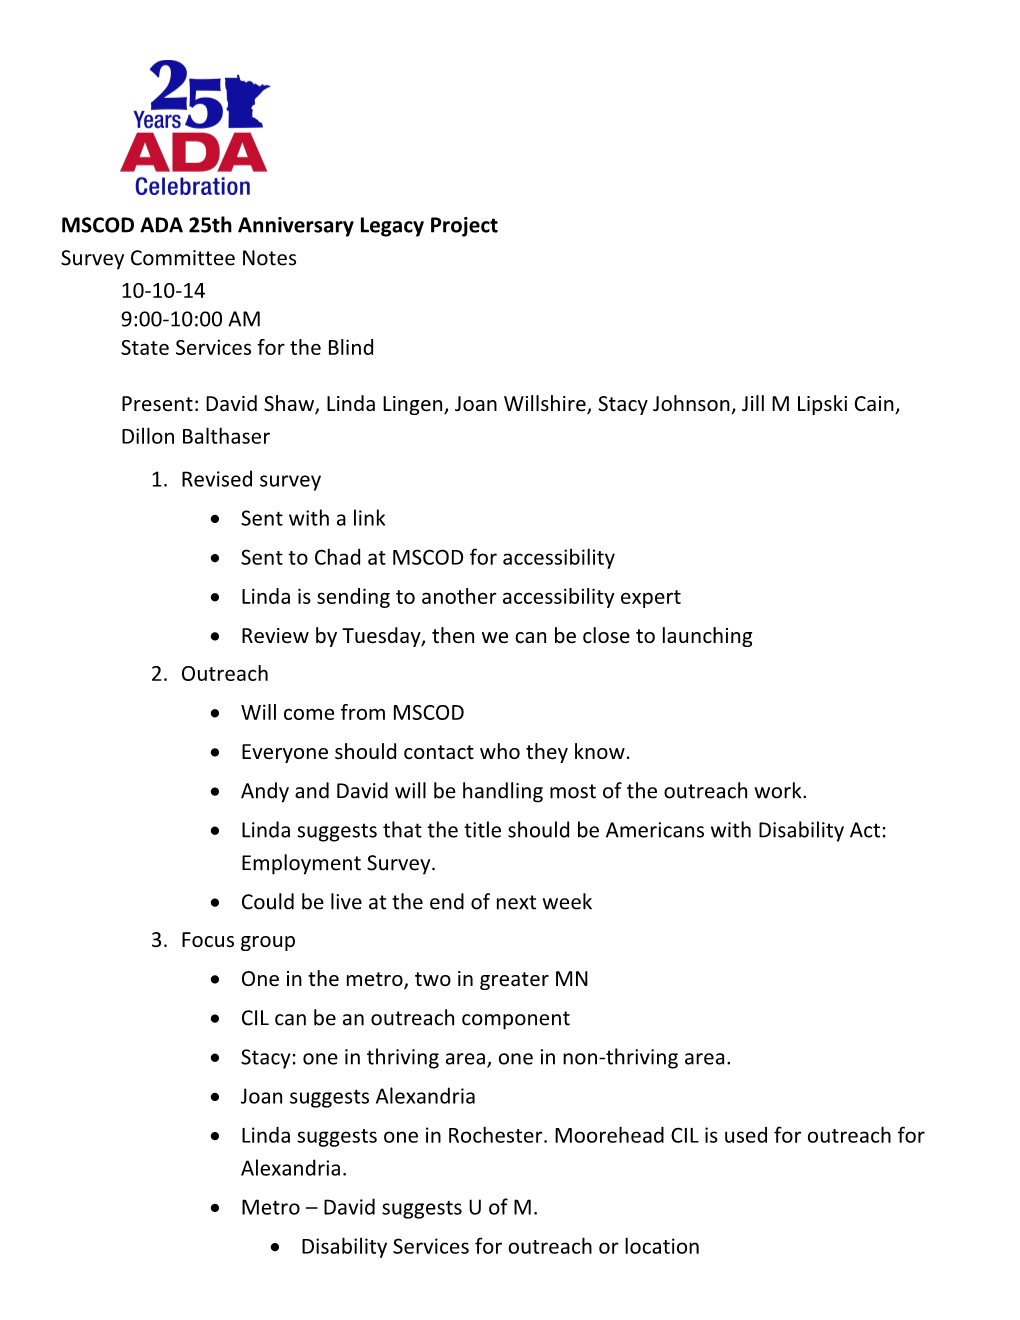 Survey Committee Notes, 10-10-14